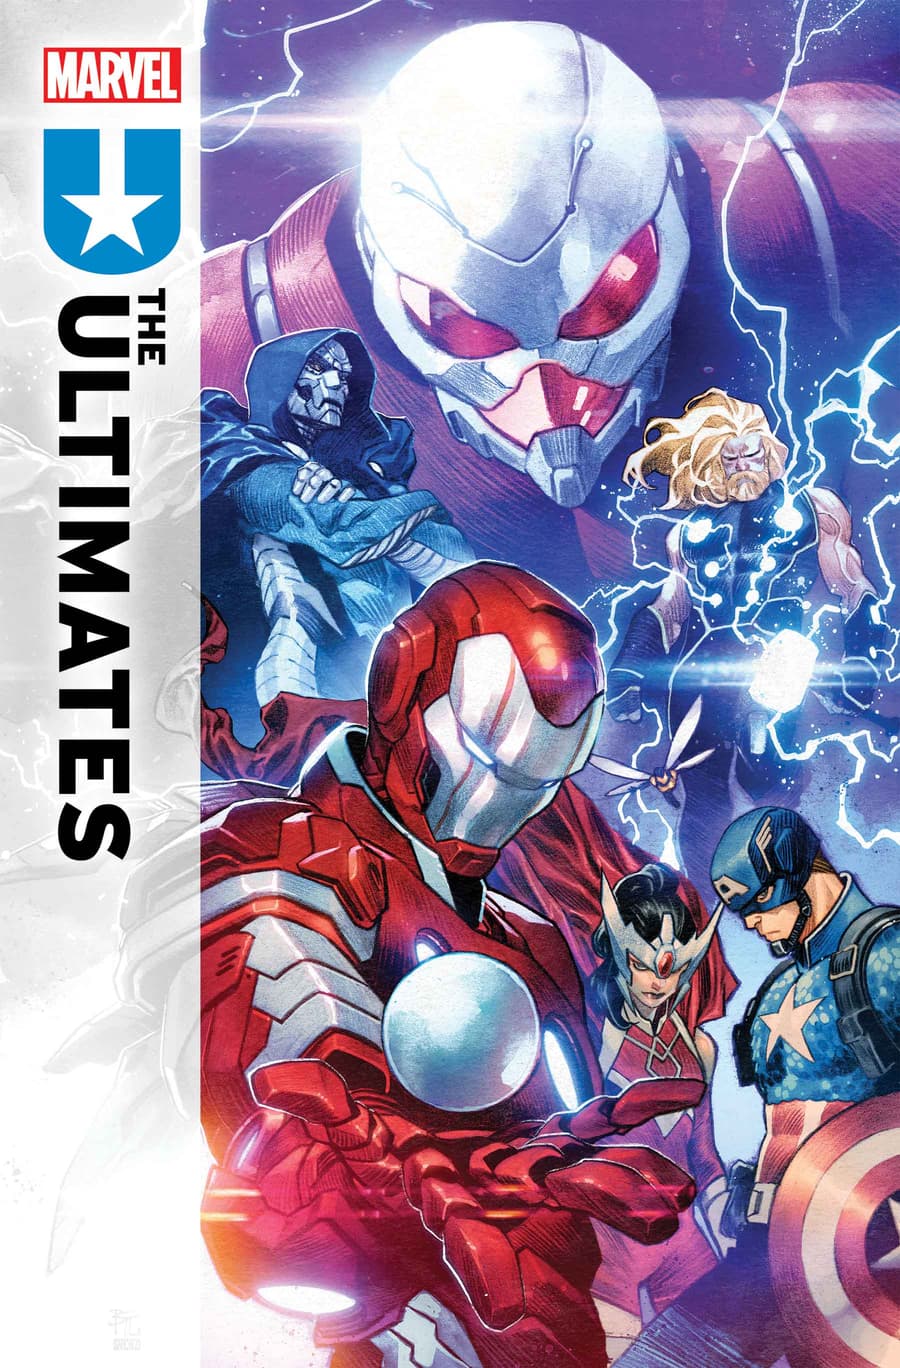 The Ultimate Universe's Mightiest Heroes Assemble in 'Ultimates' #1